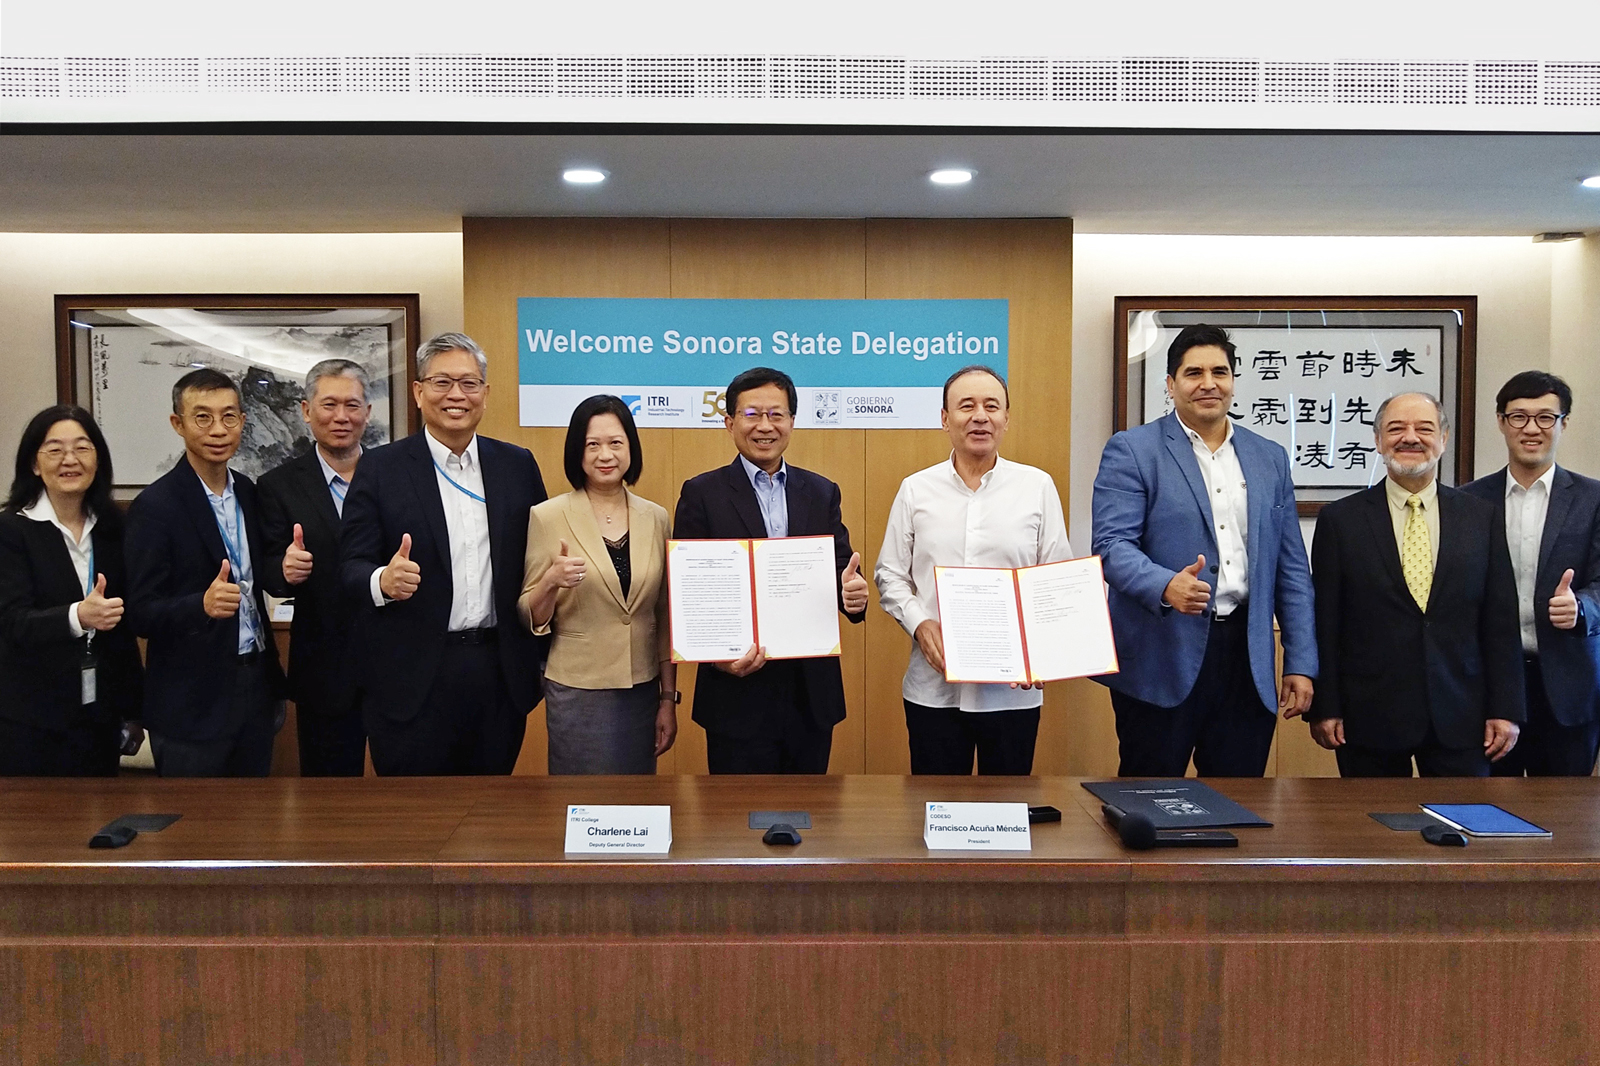 ITRI’s Senior Vice President, Stephen Su (sixth from the left), and Sonora Governor Francisco Alfonso Durazo Montaño (fourth from the right) join hands to sign the agreement for science park strategic planning consultancy services.